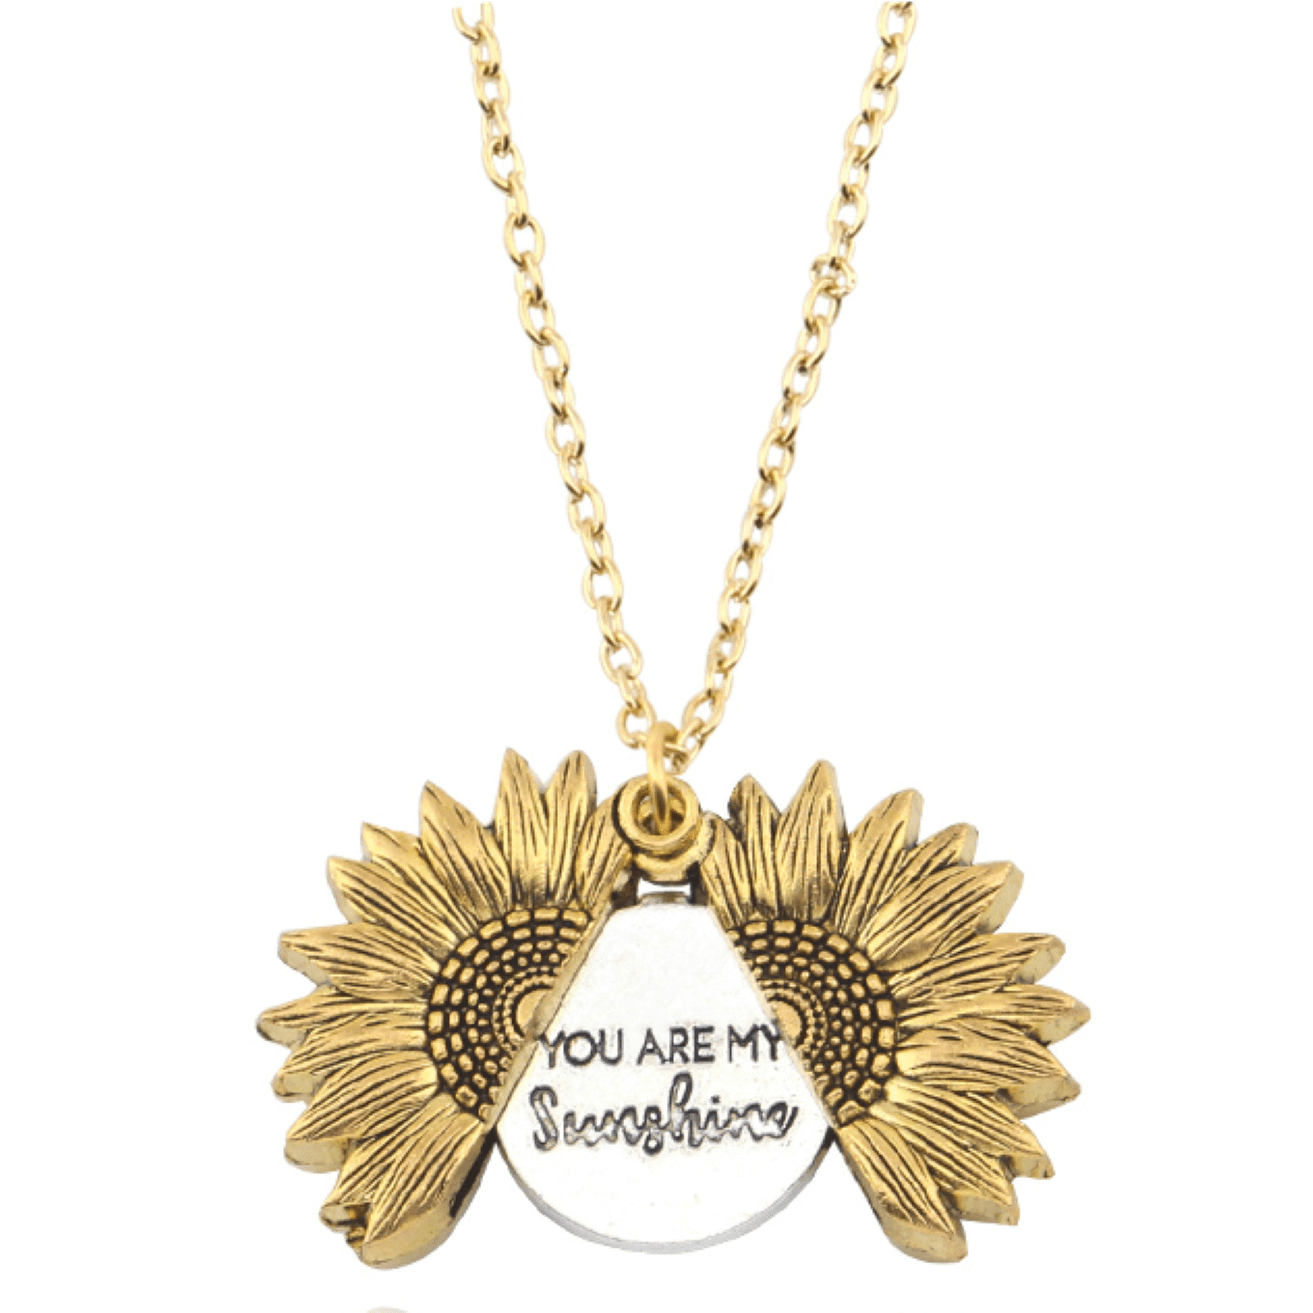 "You Are My Sunshine" Open Sunflower Pendant Necklace Choker Chain Women New 